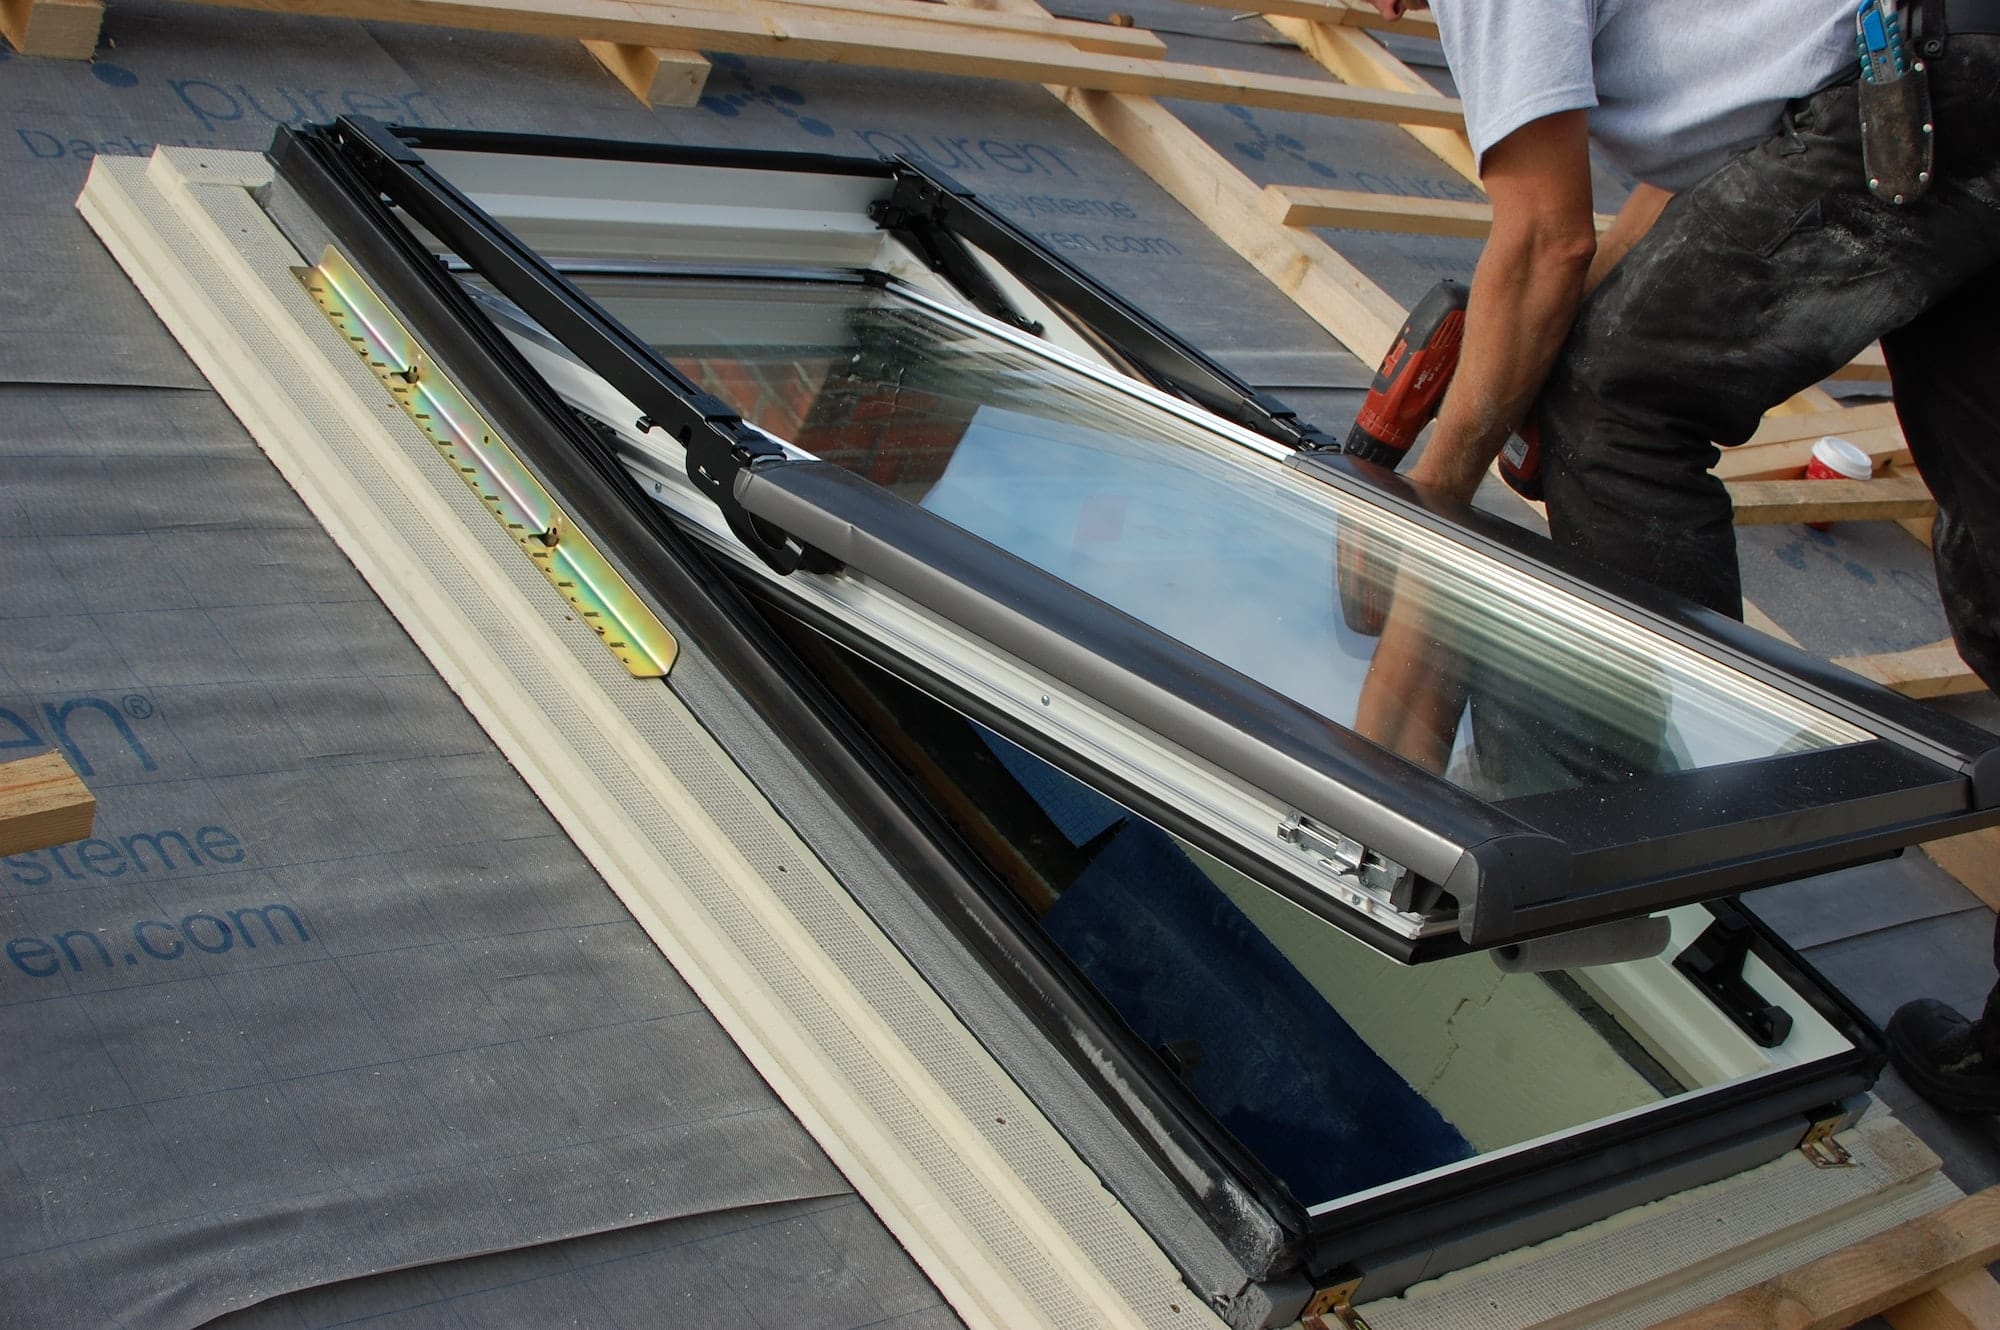 Velux Window Contractors Clwt-y-bont, LL55 - DD Roofing